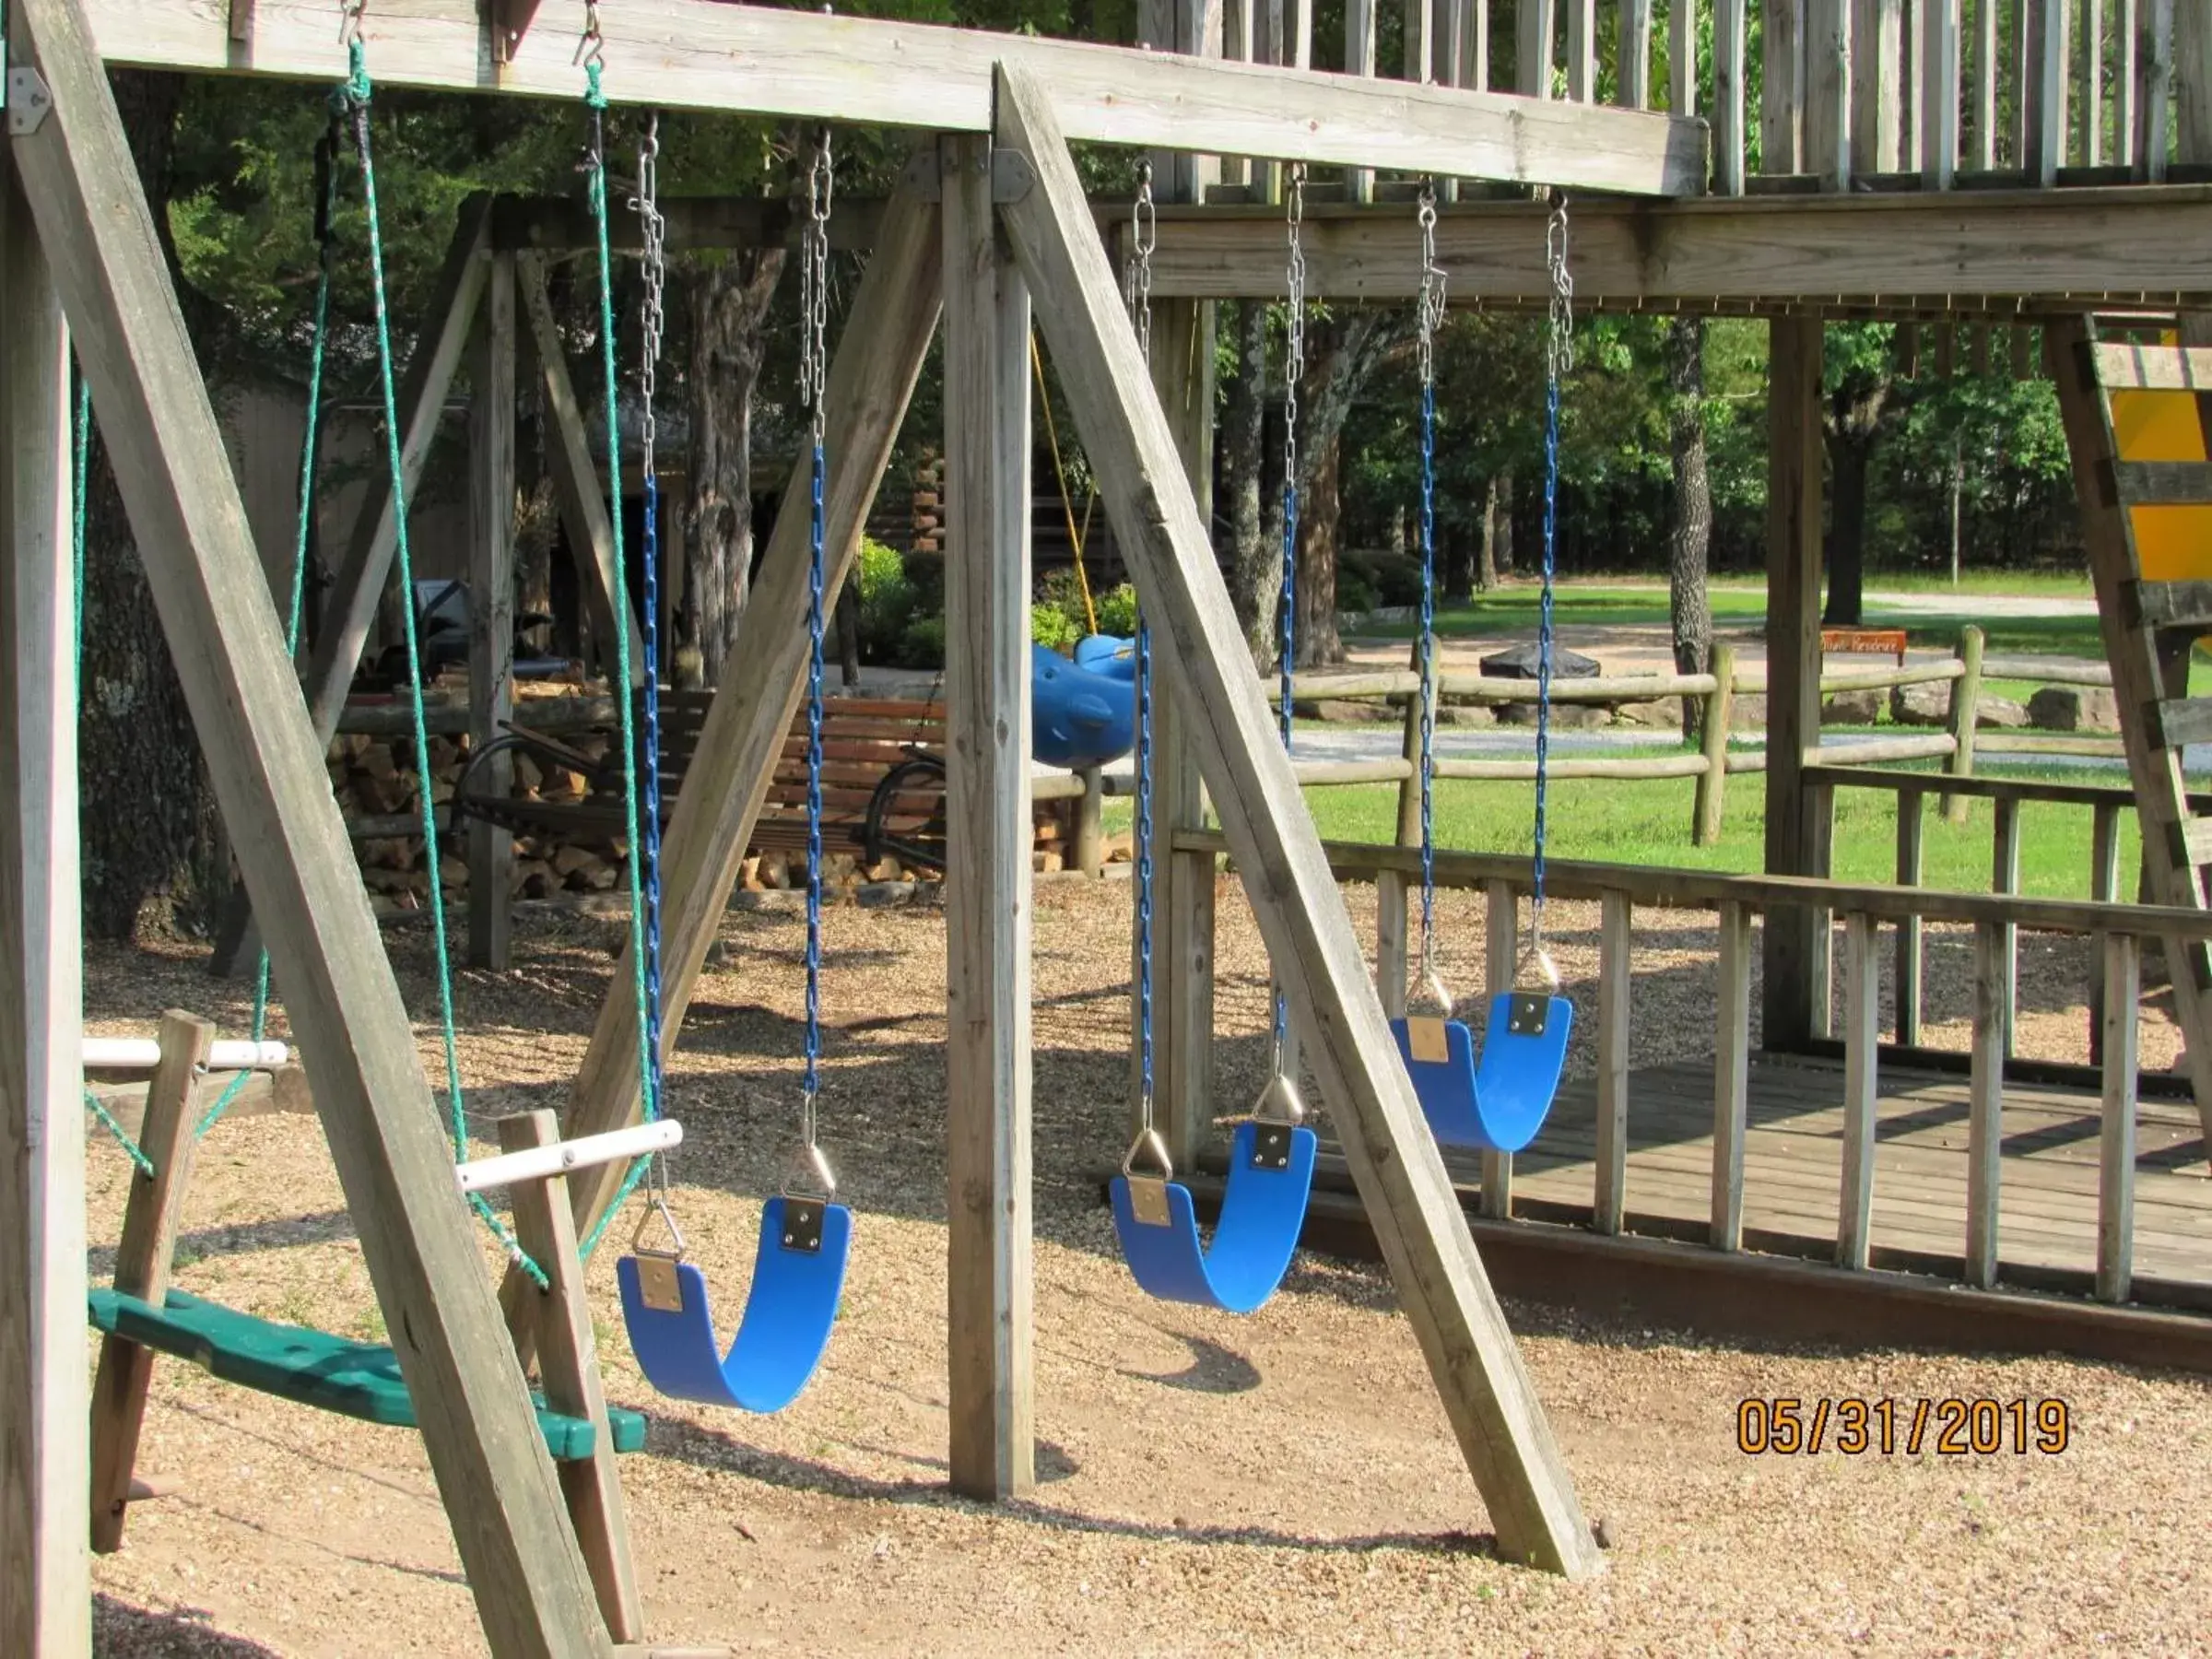 Property building, Children's Play Area in Bar M Resort & Campground